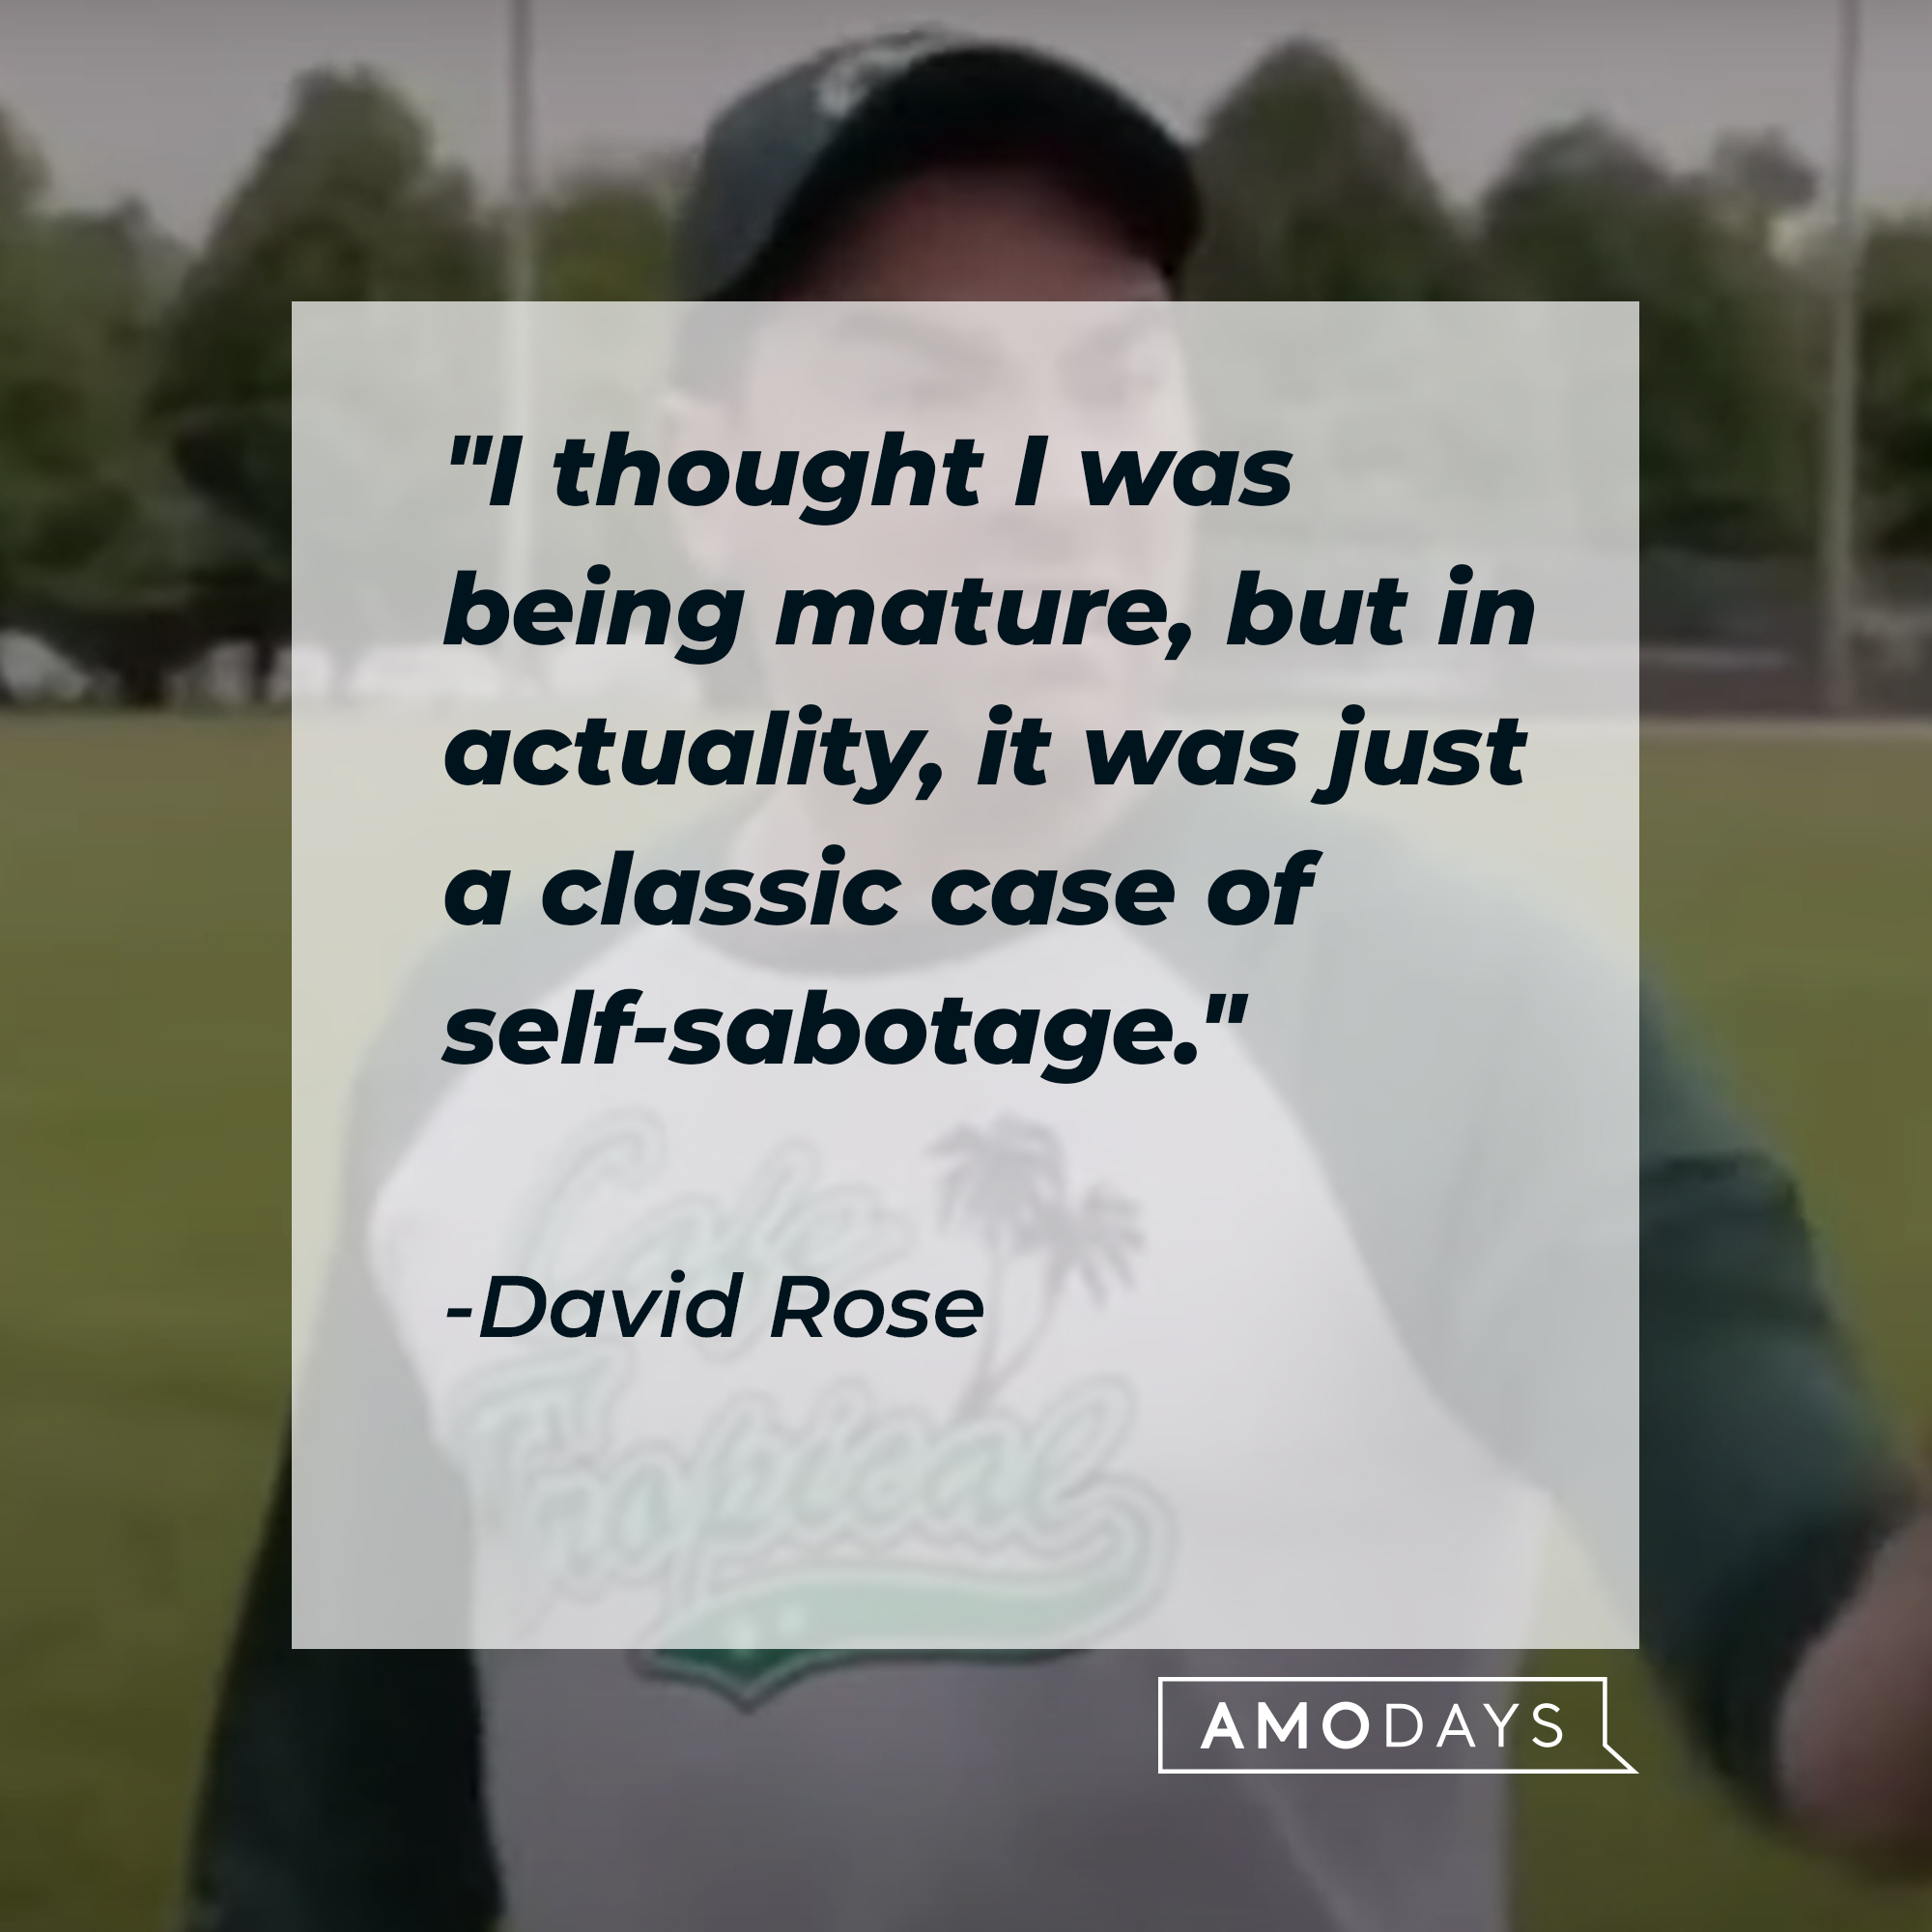 A photo of David Rose with the quote, "I thought I was being mature, but in actuality, it was just a classic case of self-sabotage." | Source: YouTube/PopTVVideo